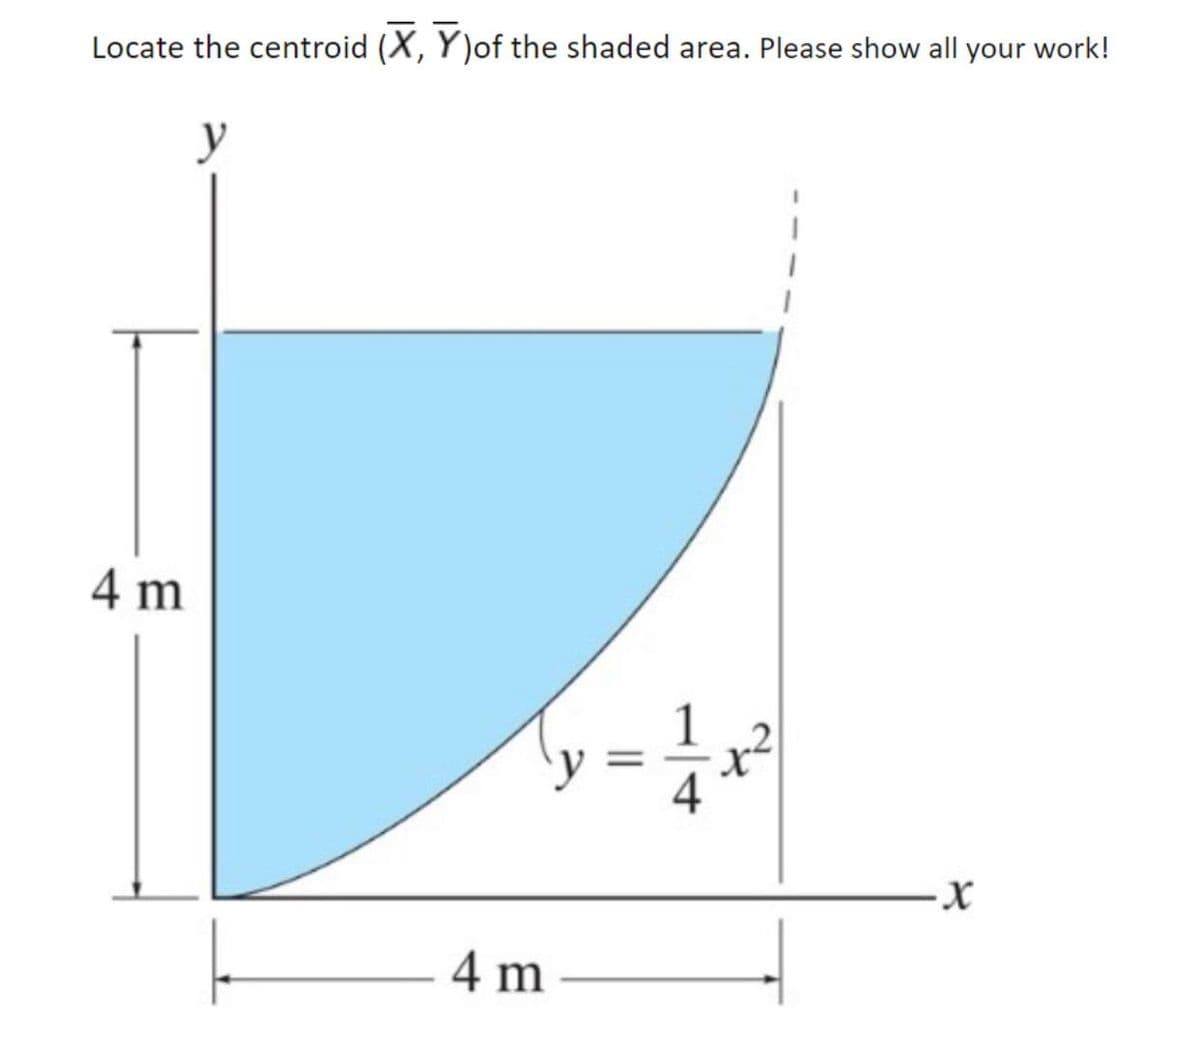 Locate the centroid (X, Y)of the shaded area. Please show all your work!
y
4 m
-X-
- 4 m
